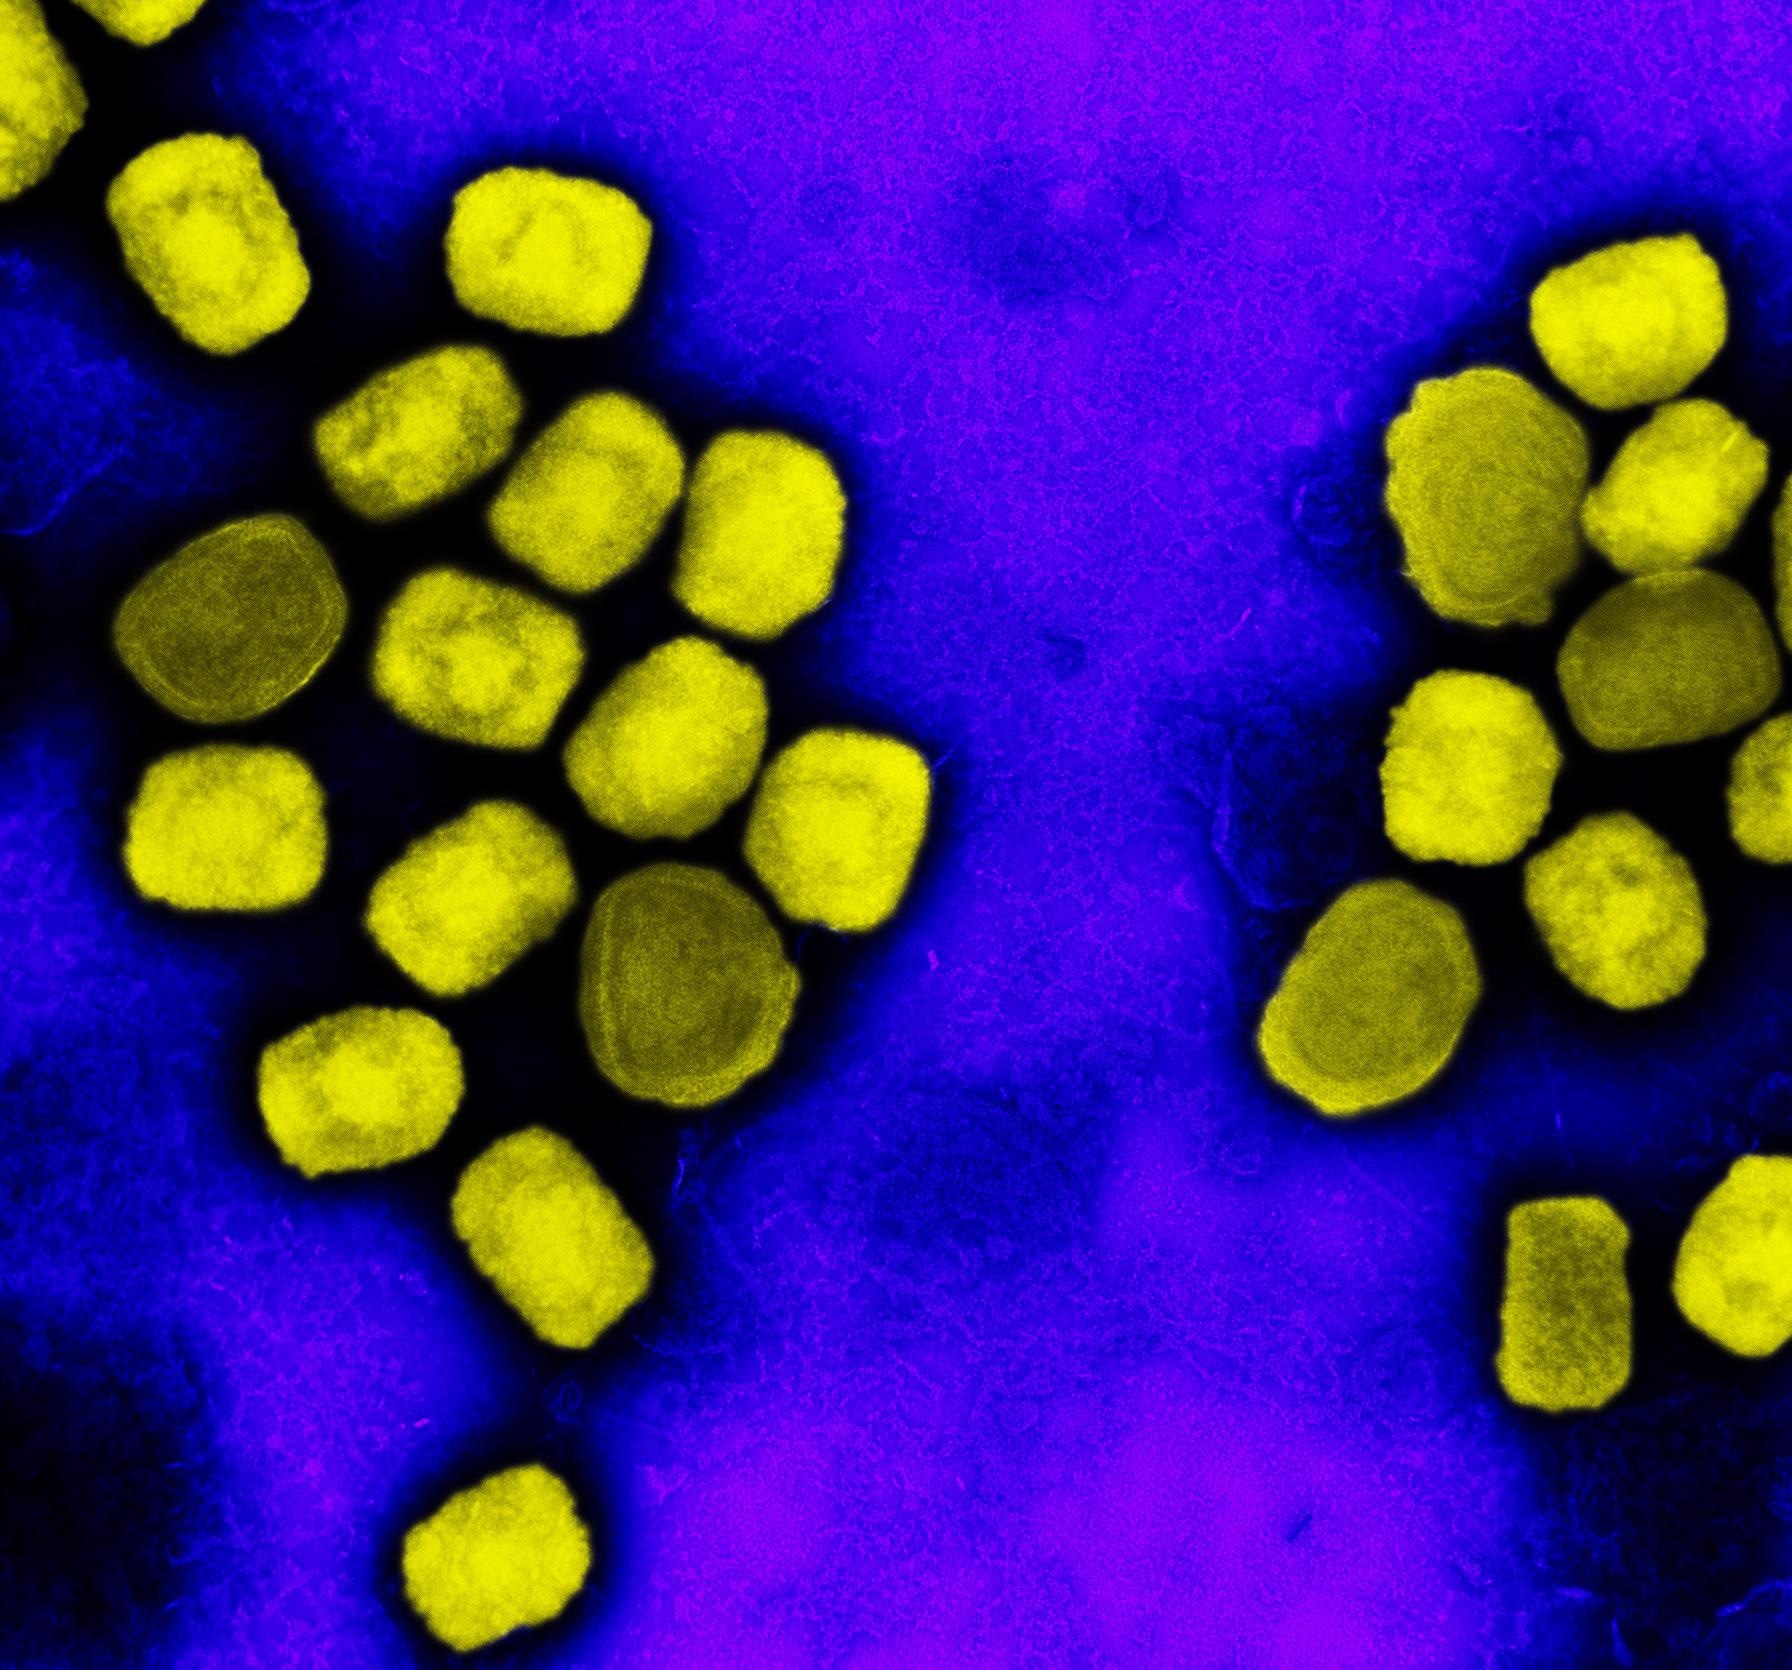 Colorized transmission electron micrograph of monkeypox virus particles (yellow) cultivated and purified from cell culture. Image captured at the NIAID Integrated Research Facility (IRF) in Fort Detrick, Maryland. Credit: NIAID